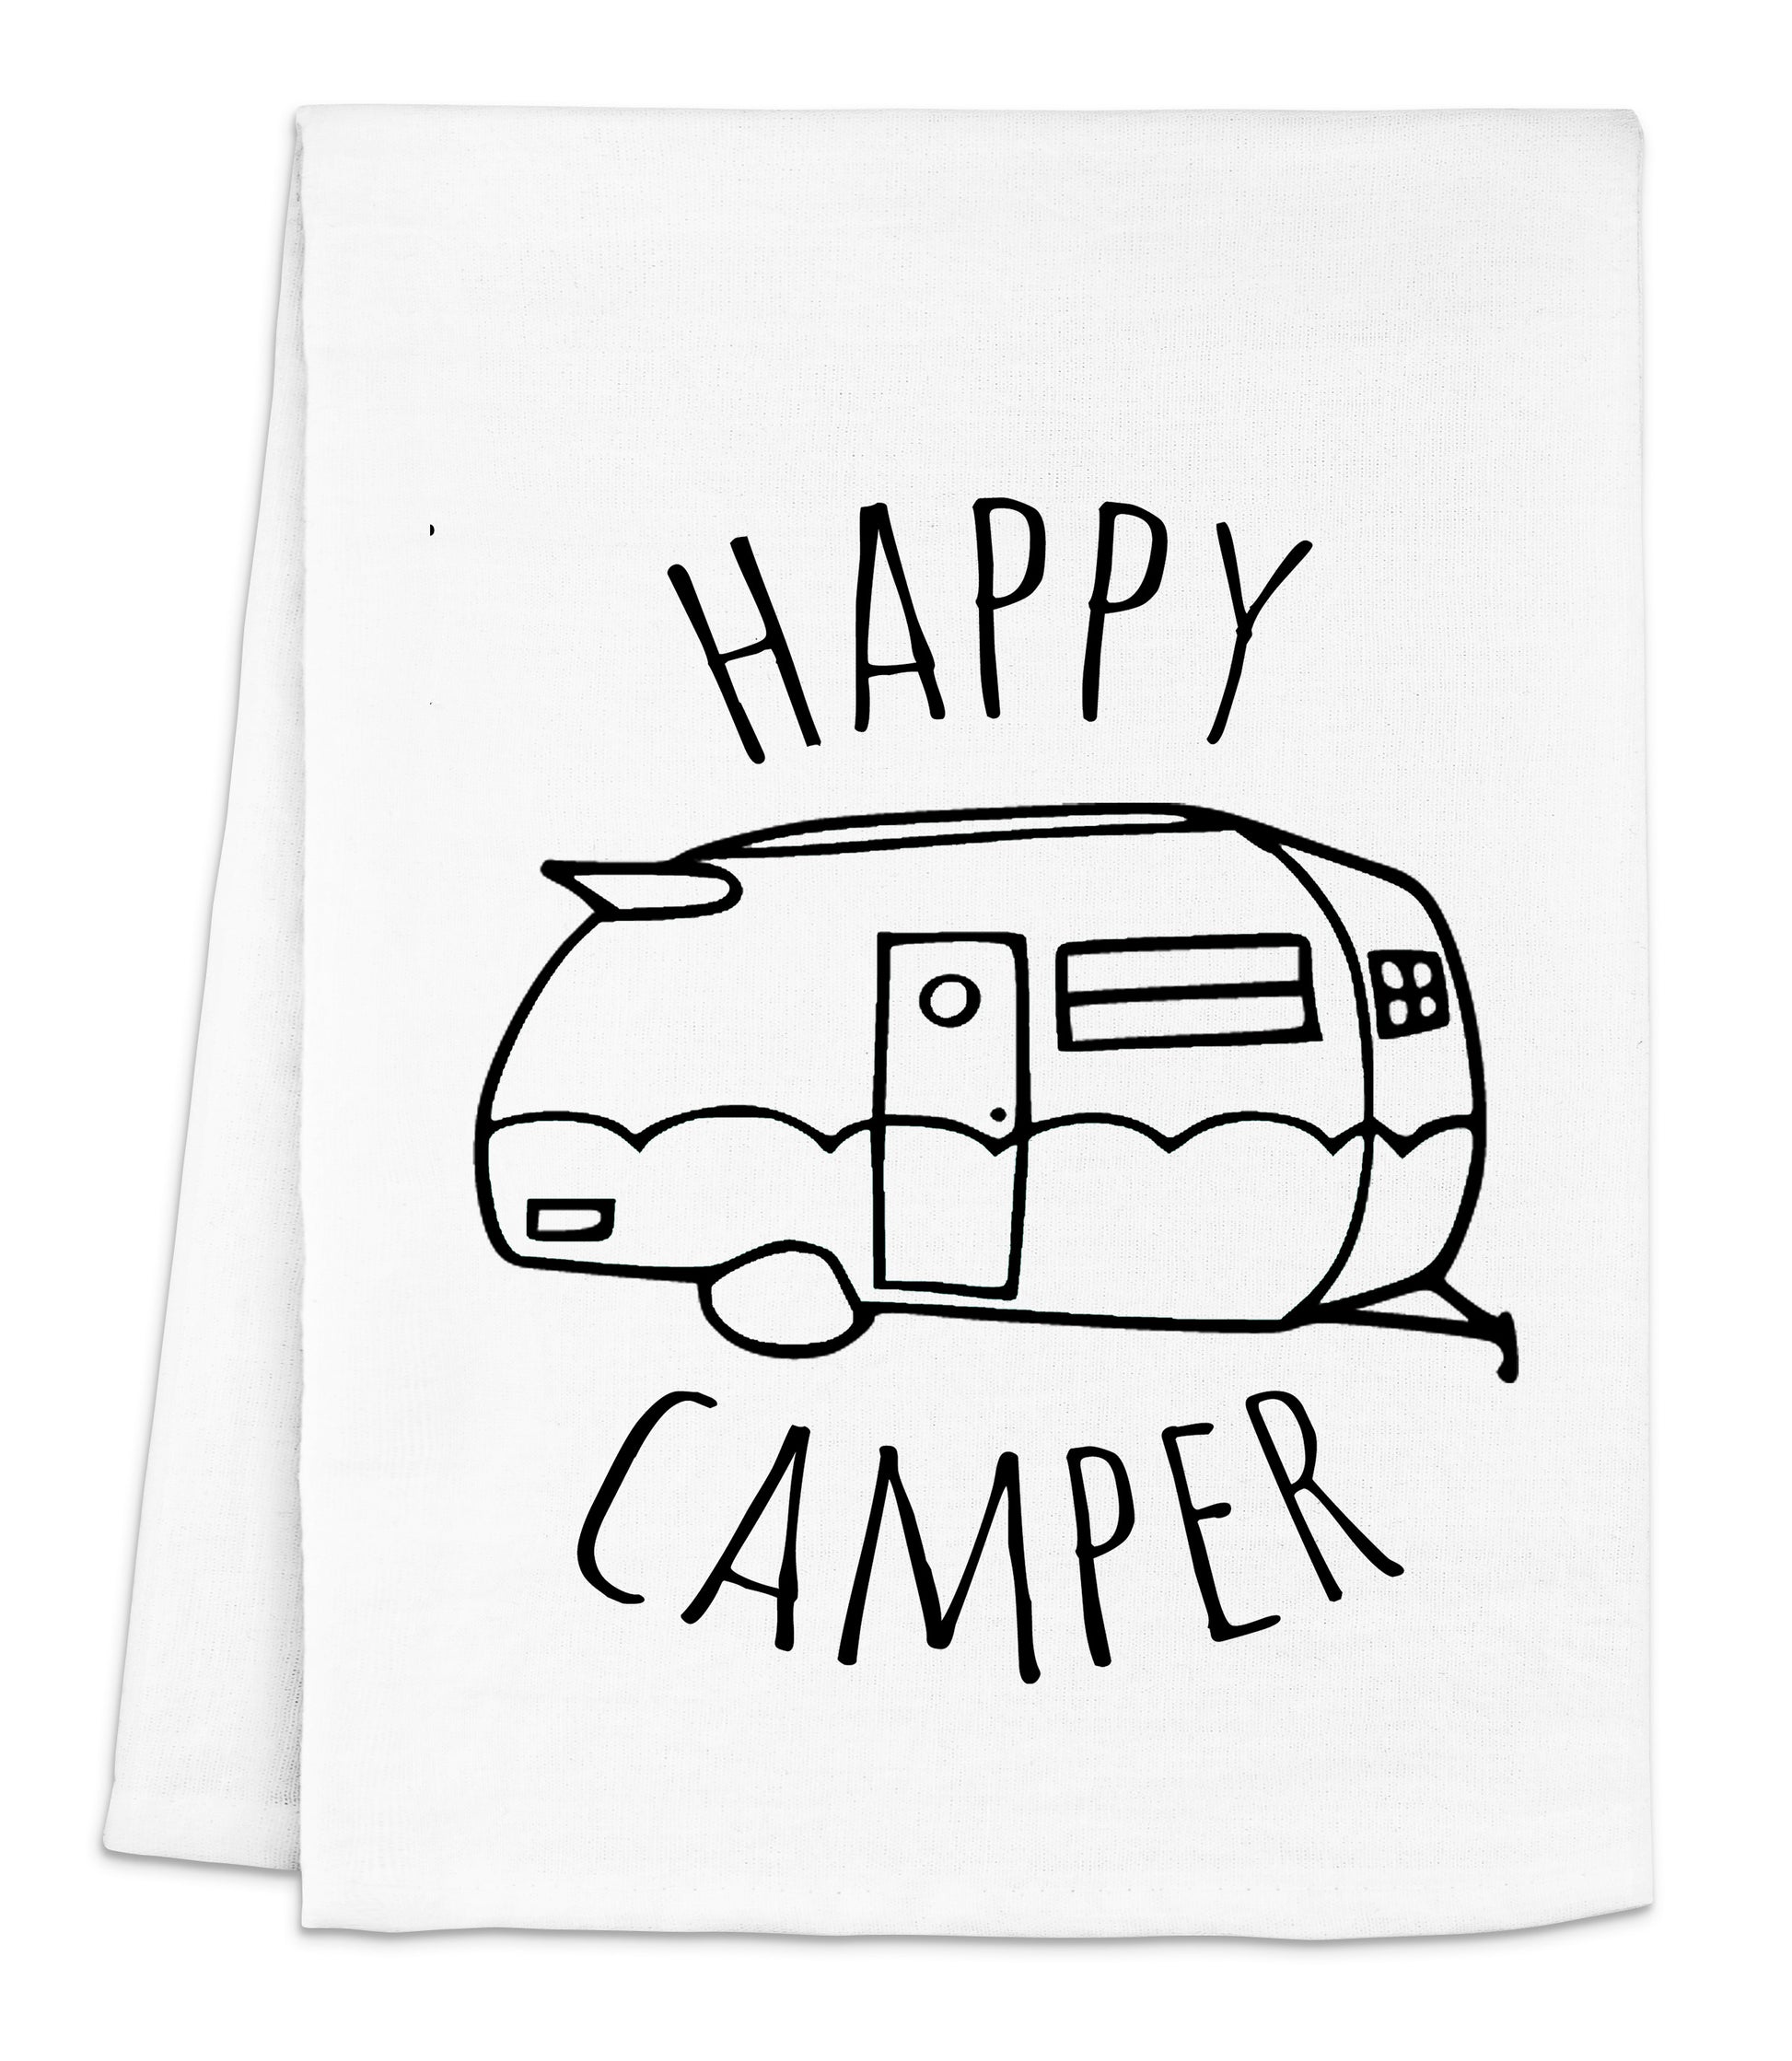 Lebsitey camping kitchen towels set of 4, happy camper dish towels kitchen  hand towels kit printed